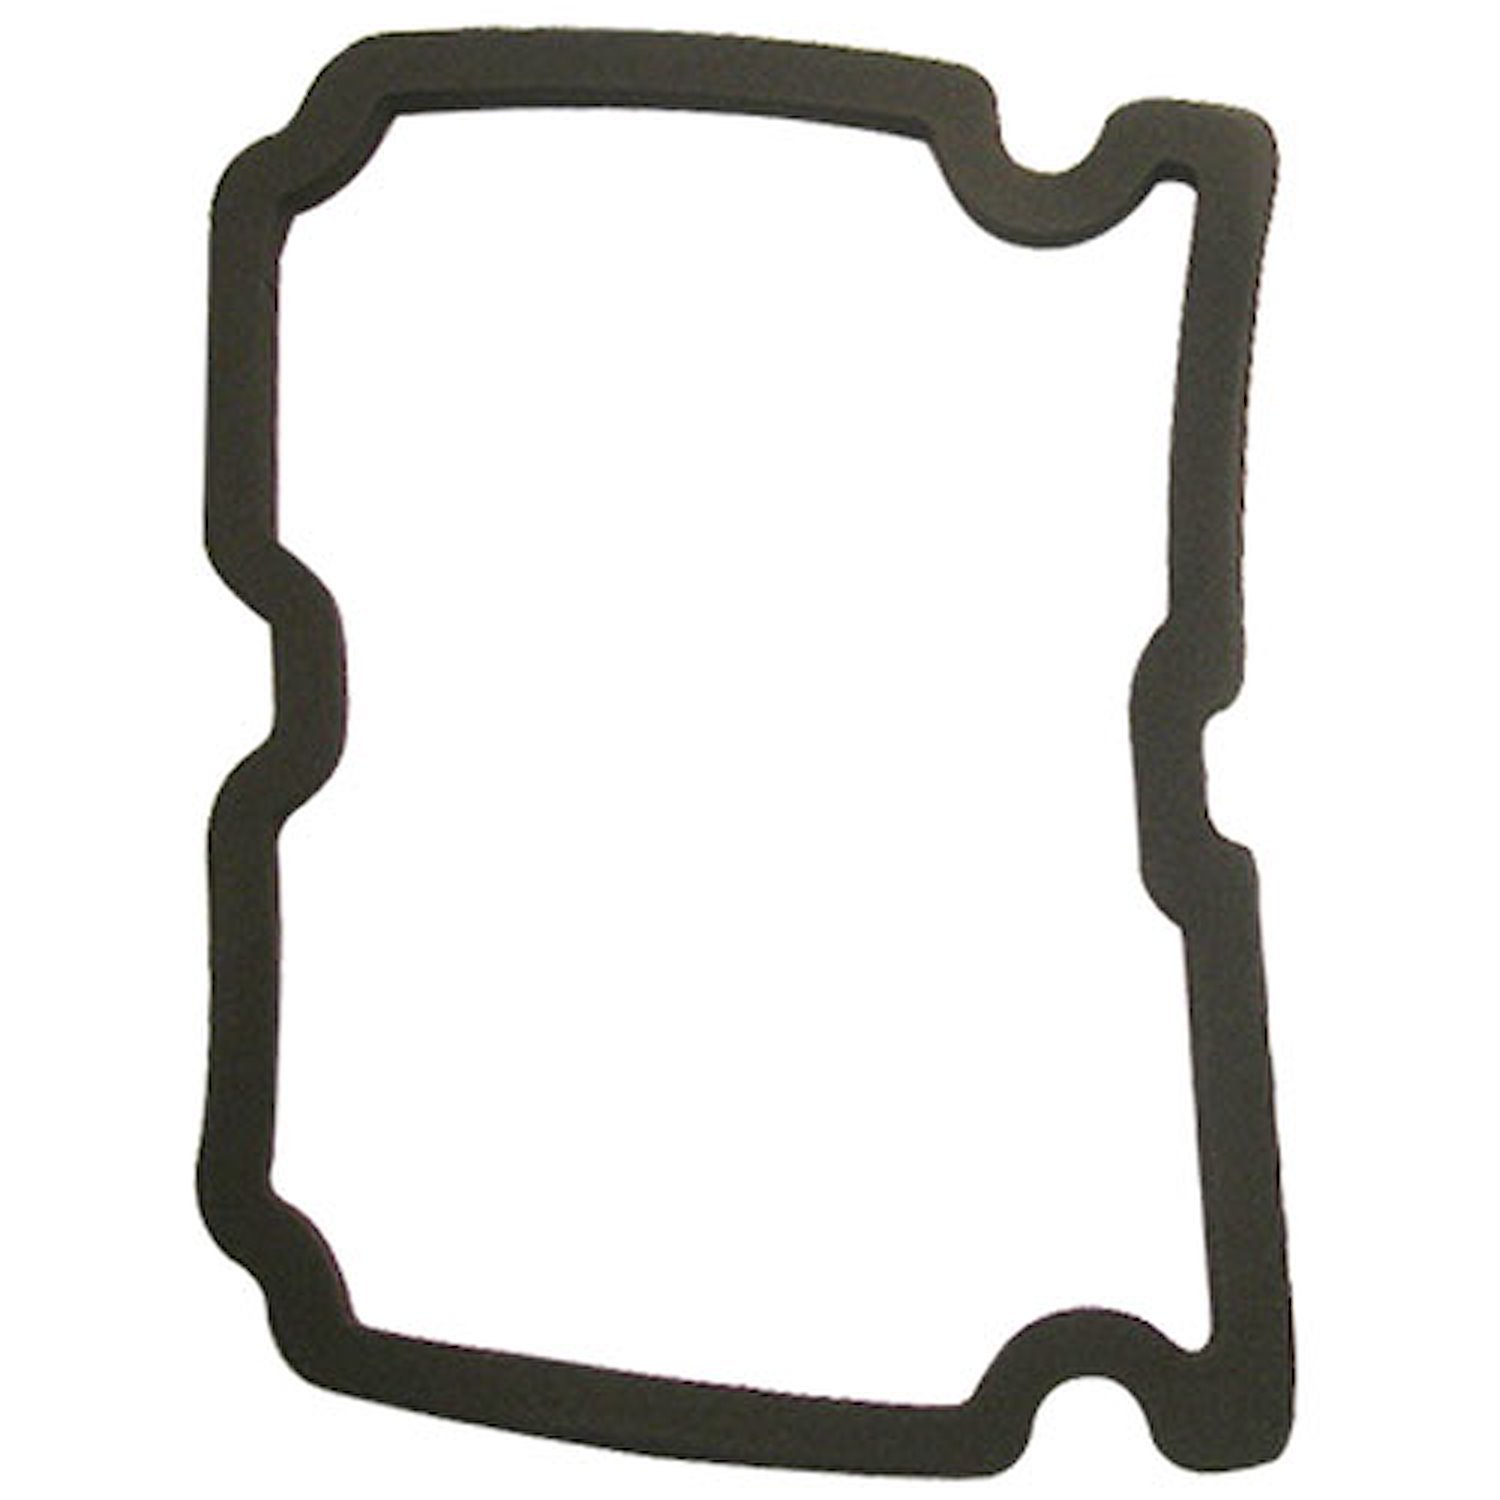 Parking Light Lens Gasket 1971 Chevy Chevelle